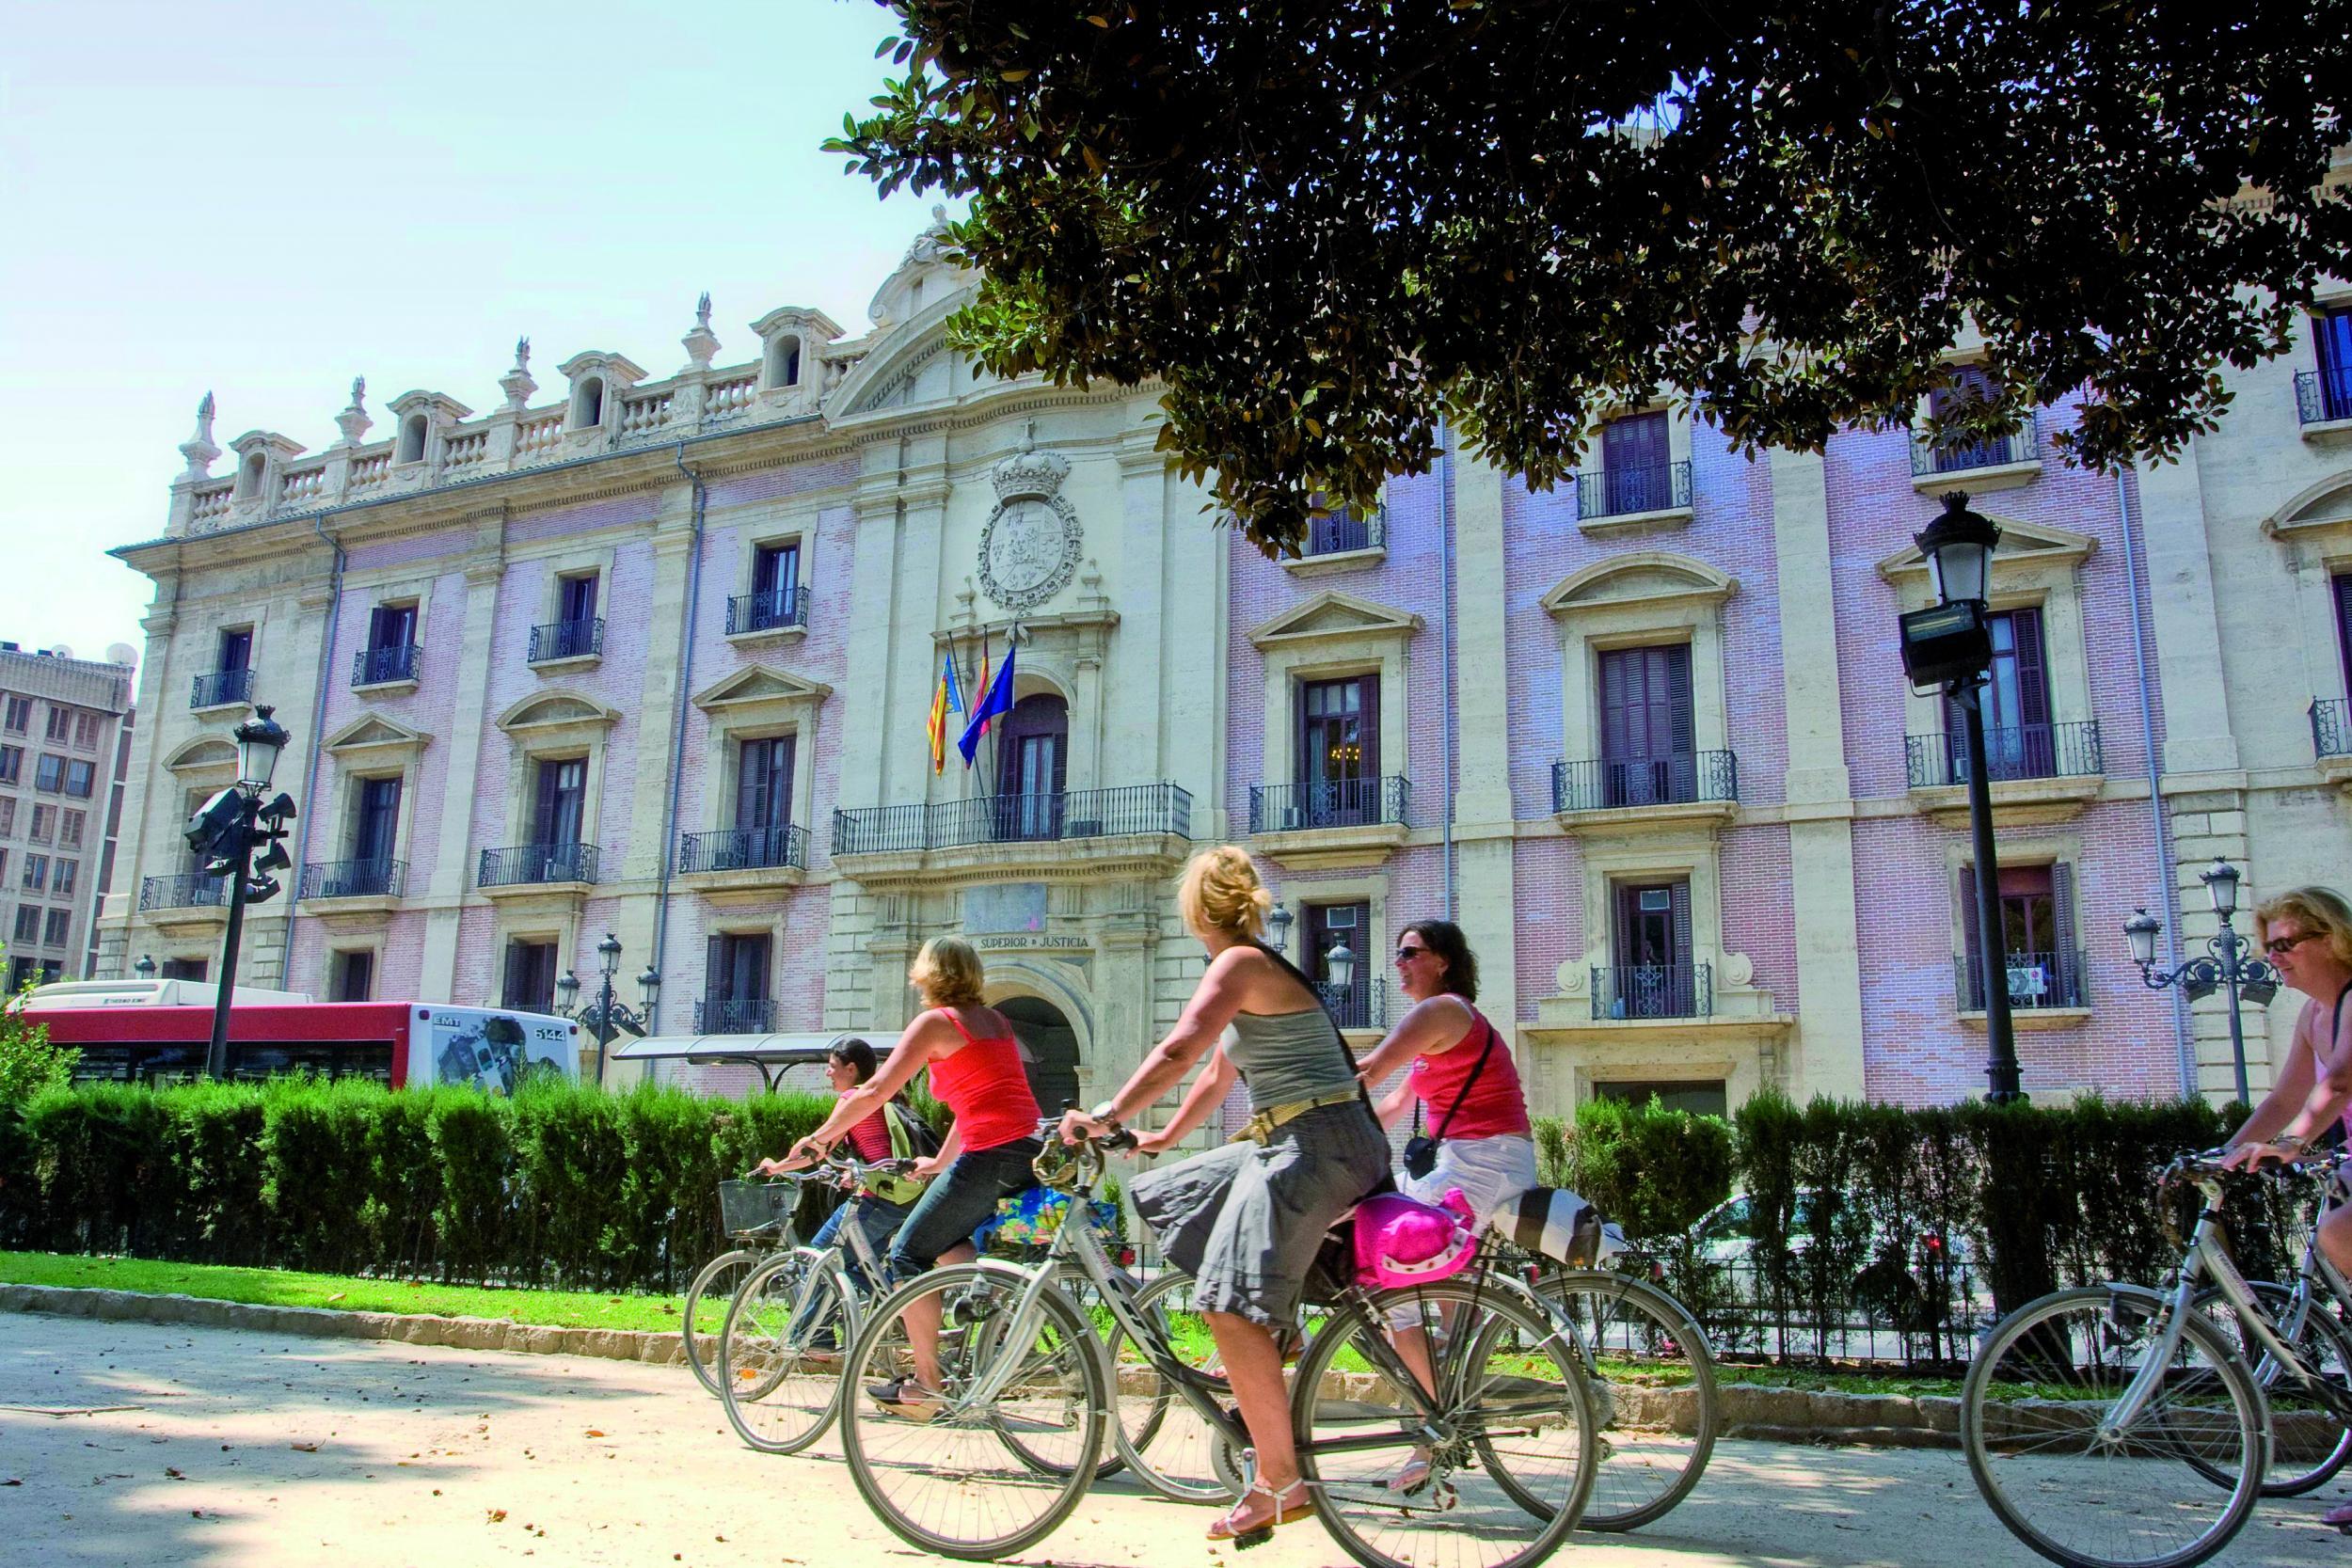 Luckily Valencia's a good place to hire a bike and ride off those food-induced calories